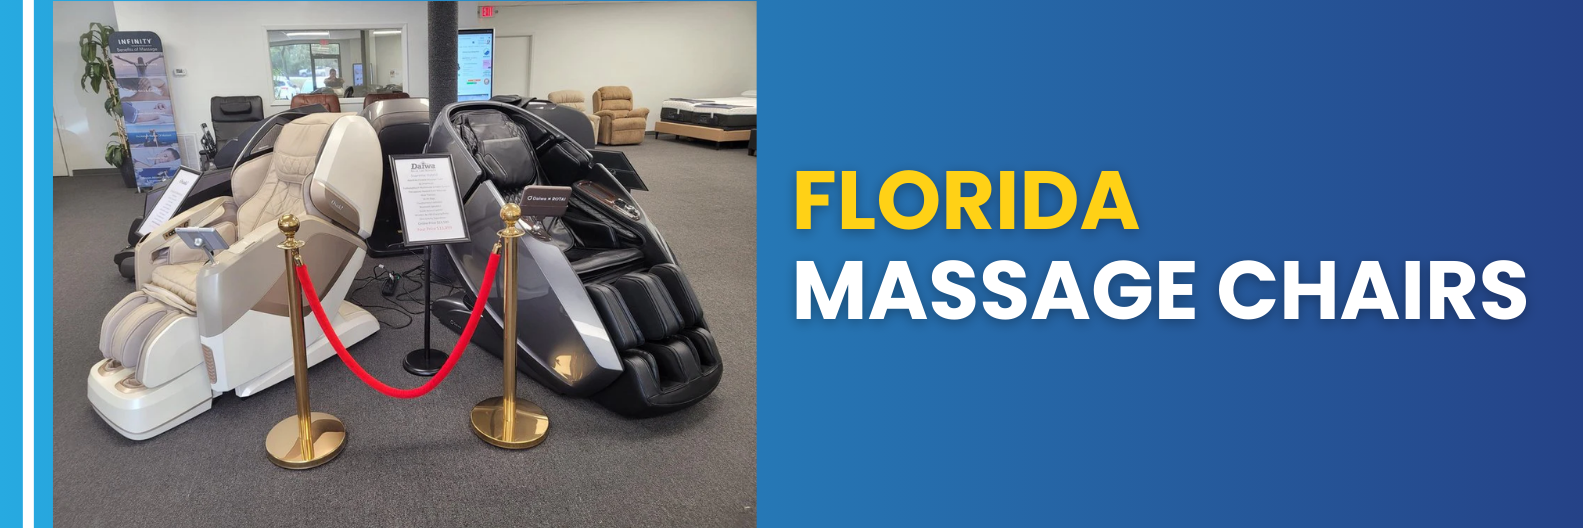 Florida massage chairs are designed to provide ultimate relaxation and stress relief, matching the state's laid-back vibe with advanced features that cater to a diverse range of preferences and therapeutic needs